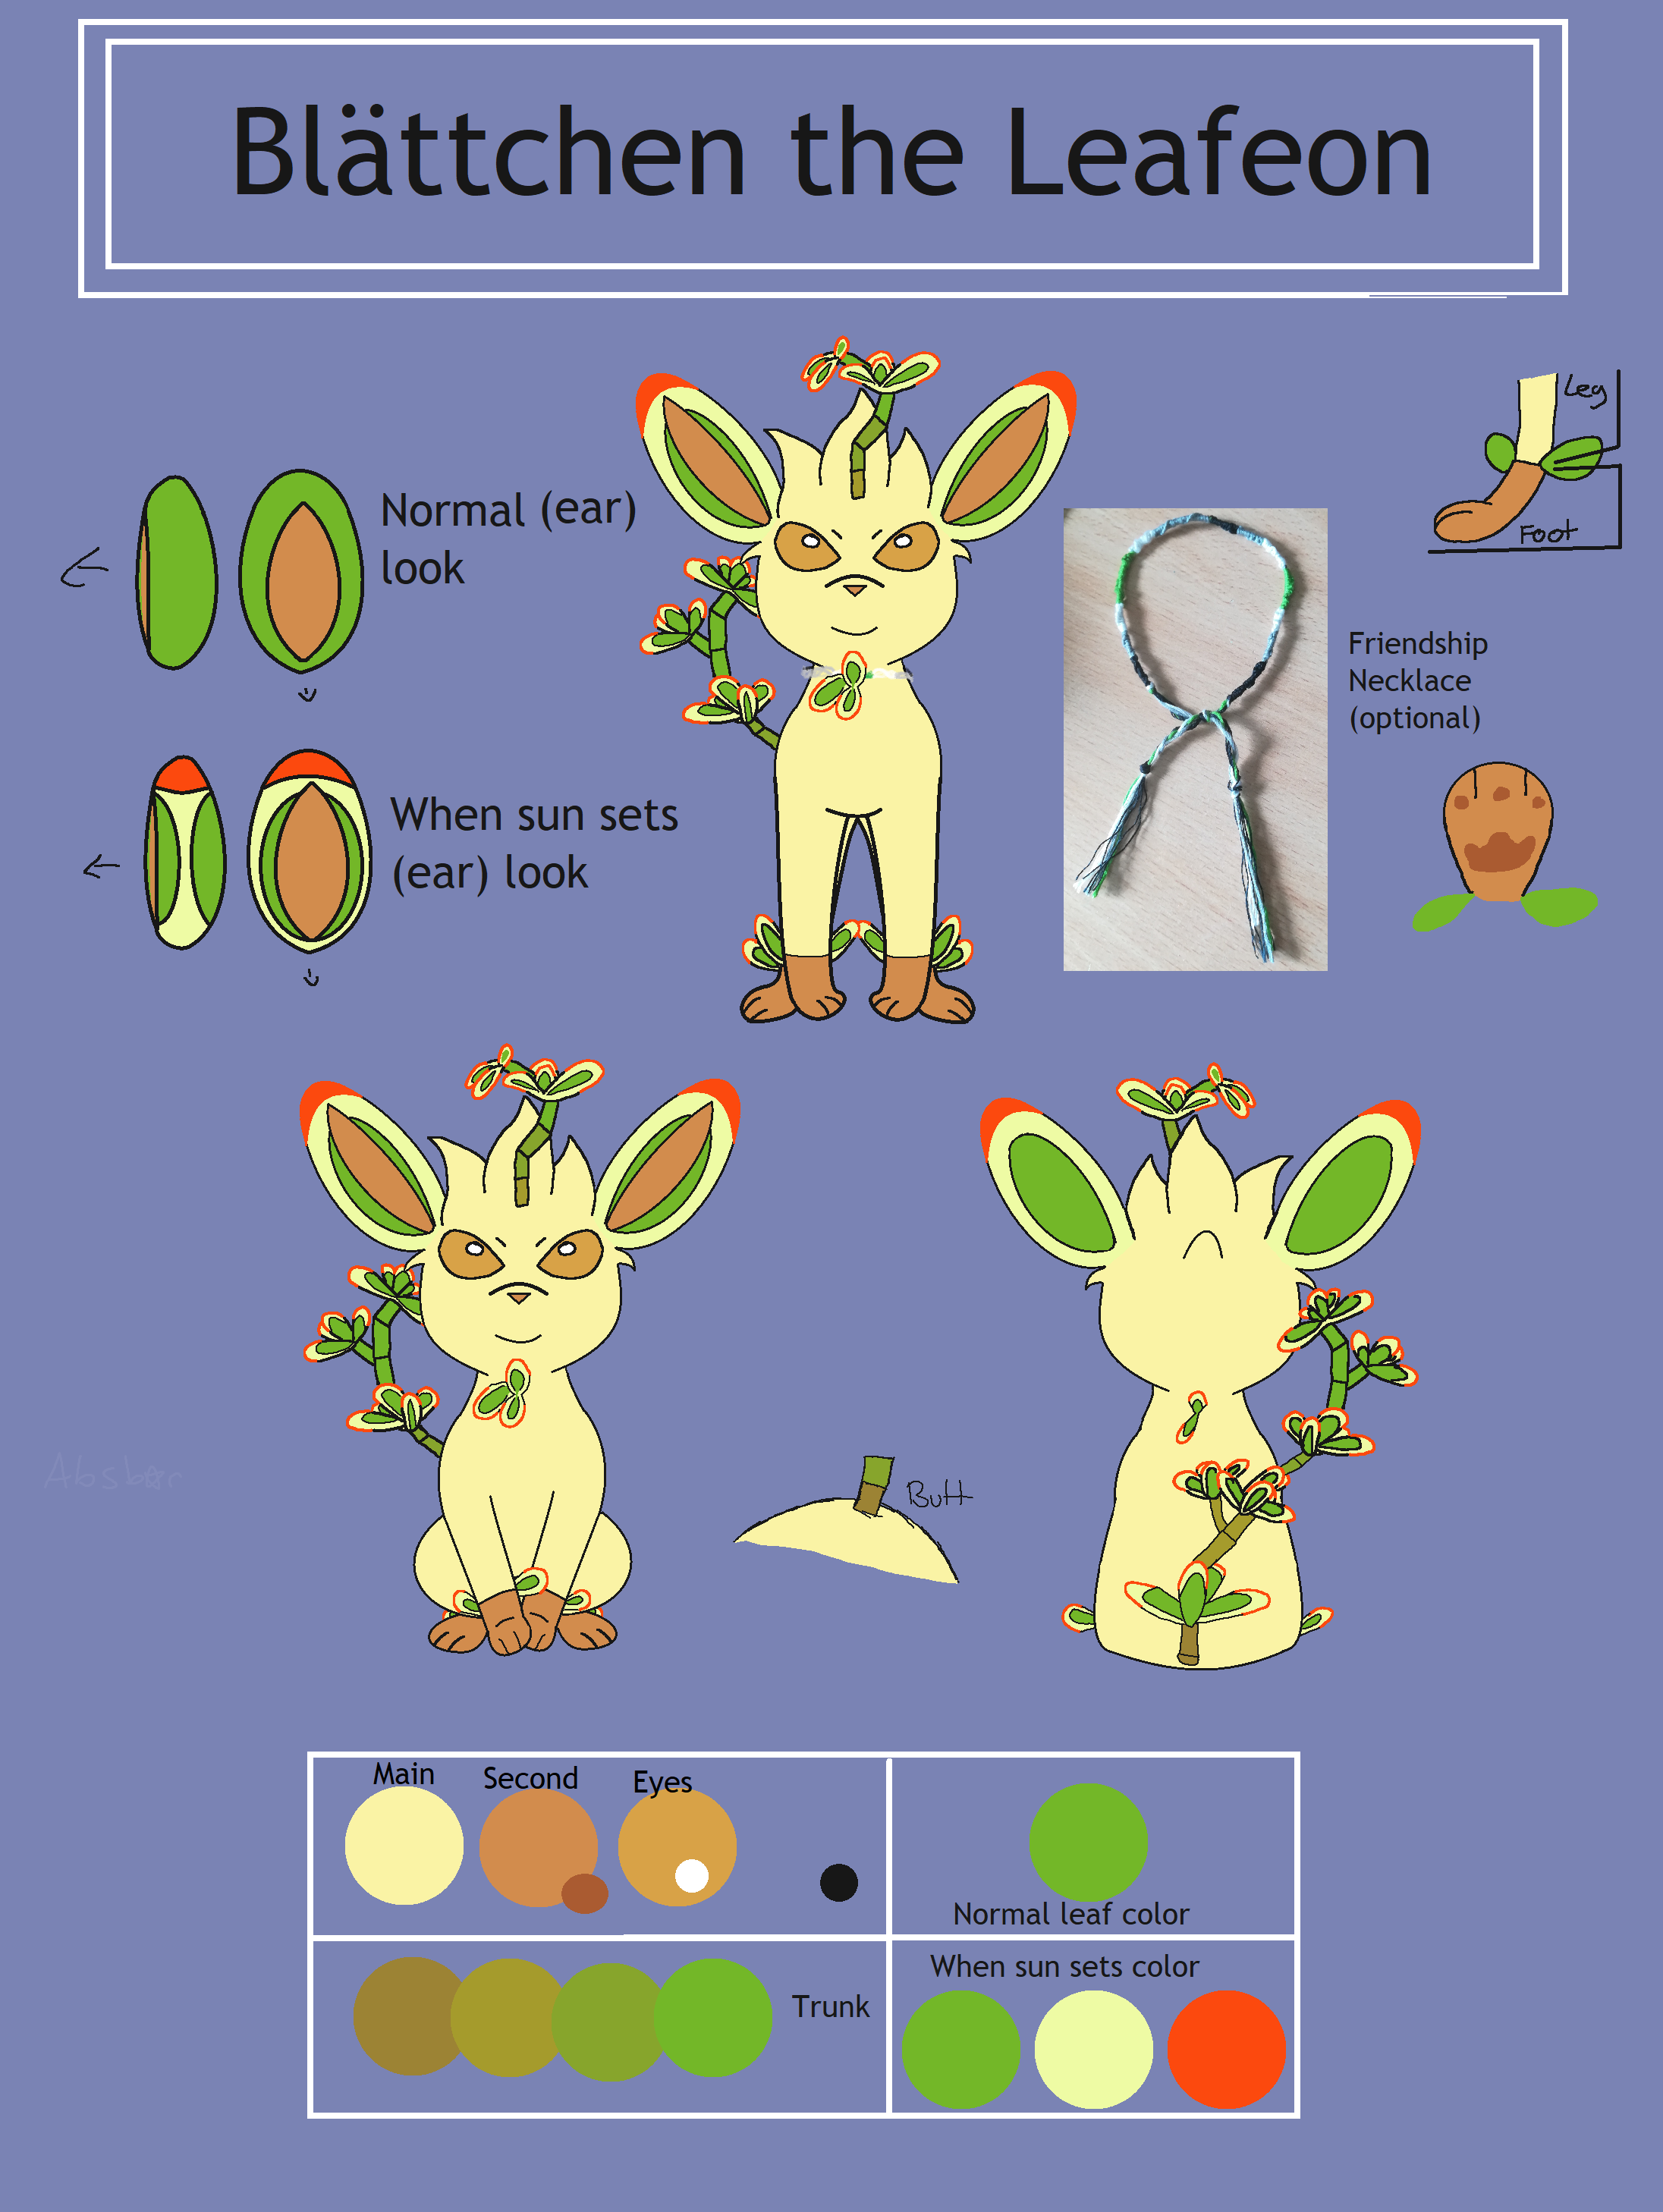 How to make a WORBLA BREASTPLATE for your (Pokemon Leafeon